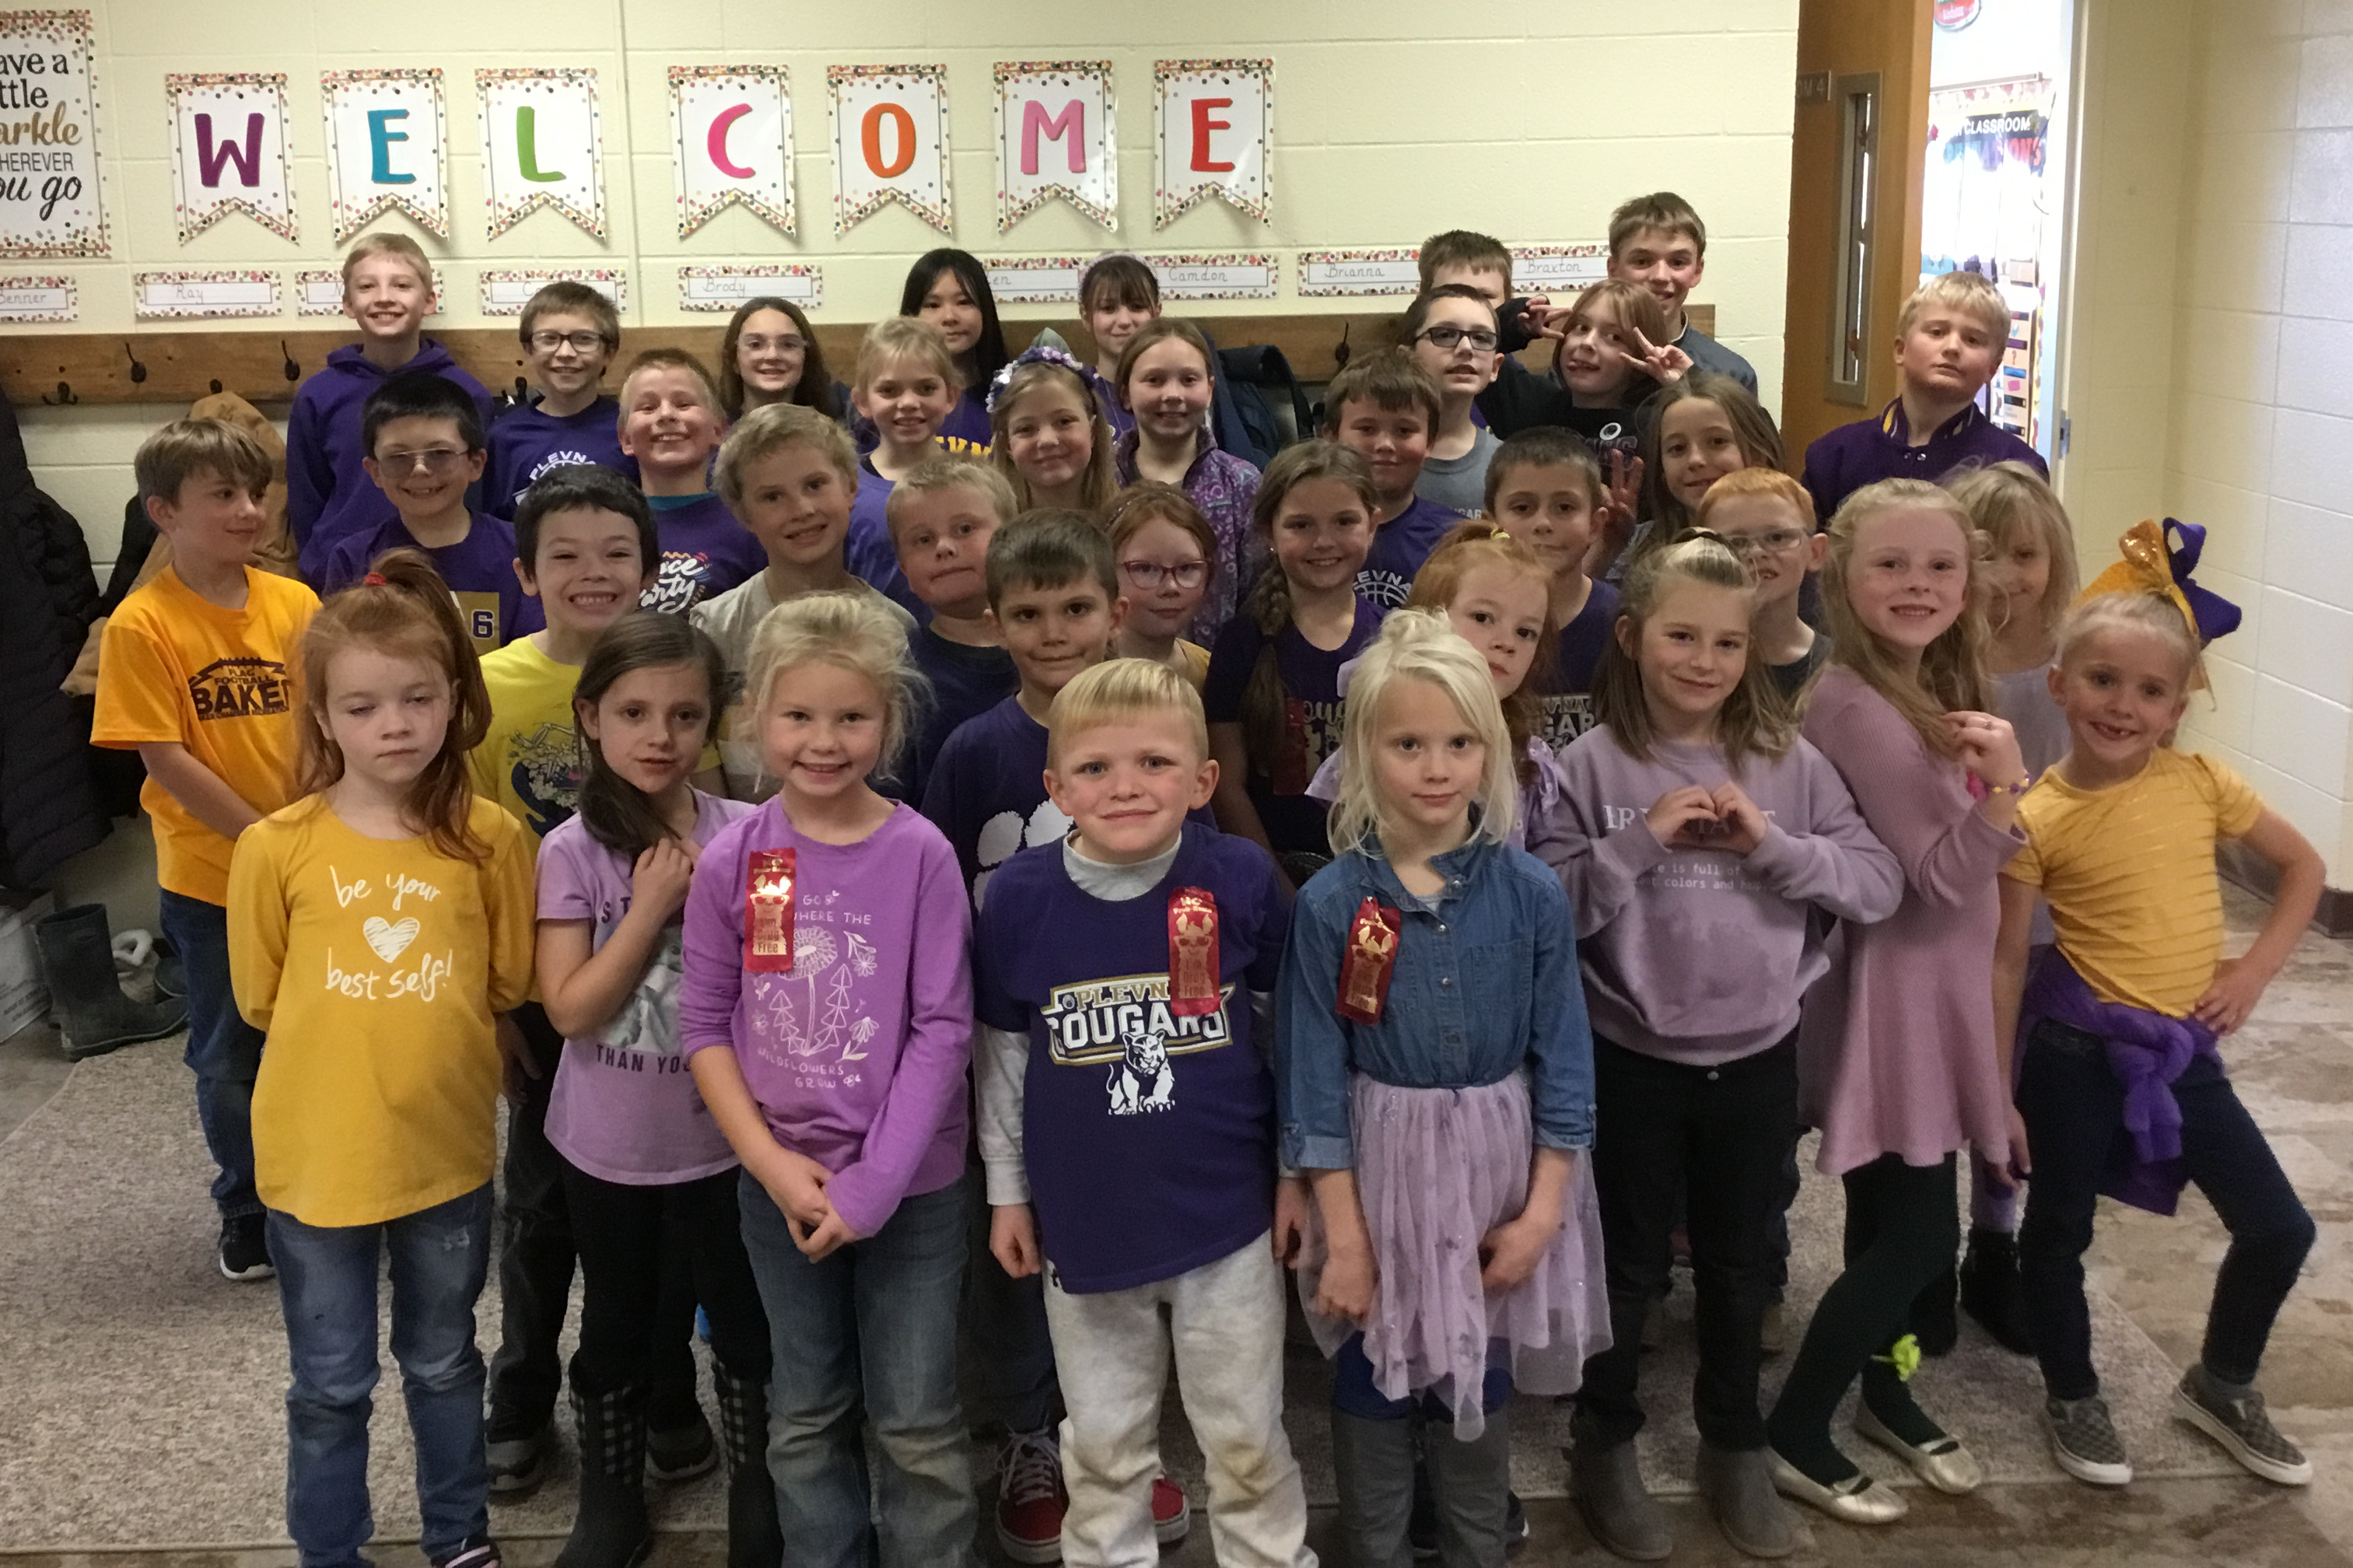 Elementary group photo of students in school colors.